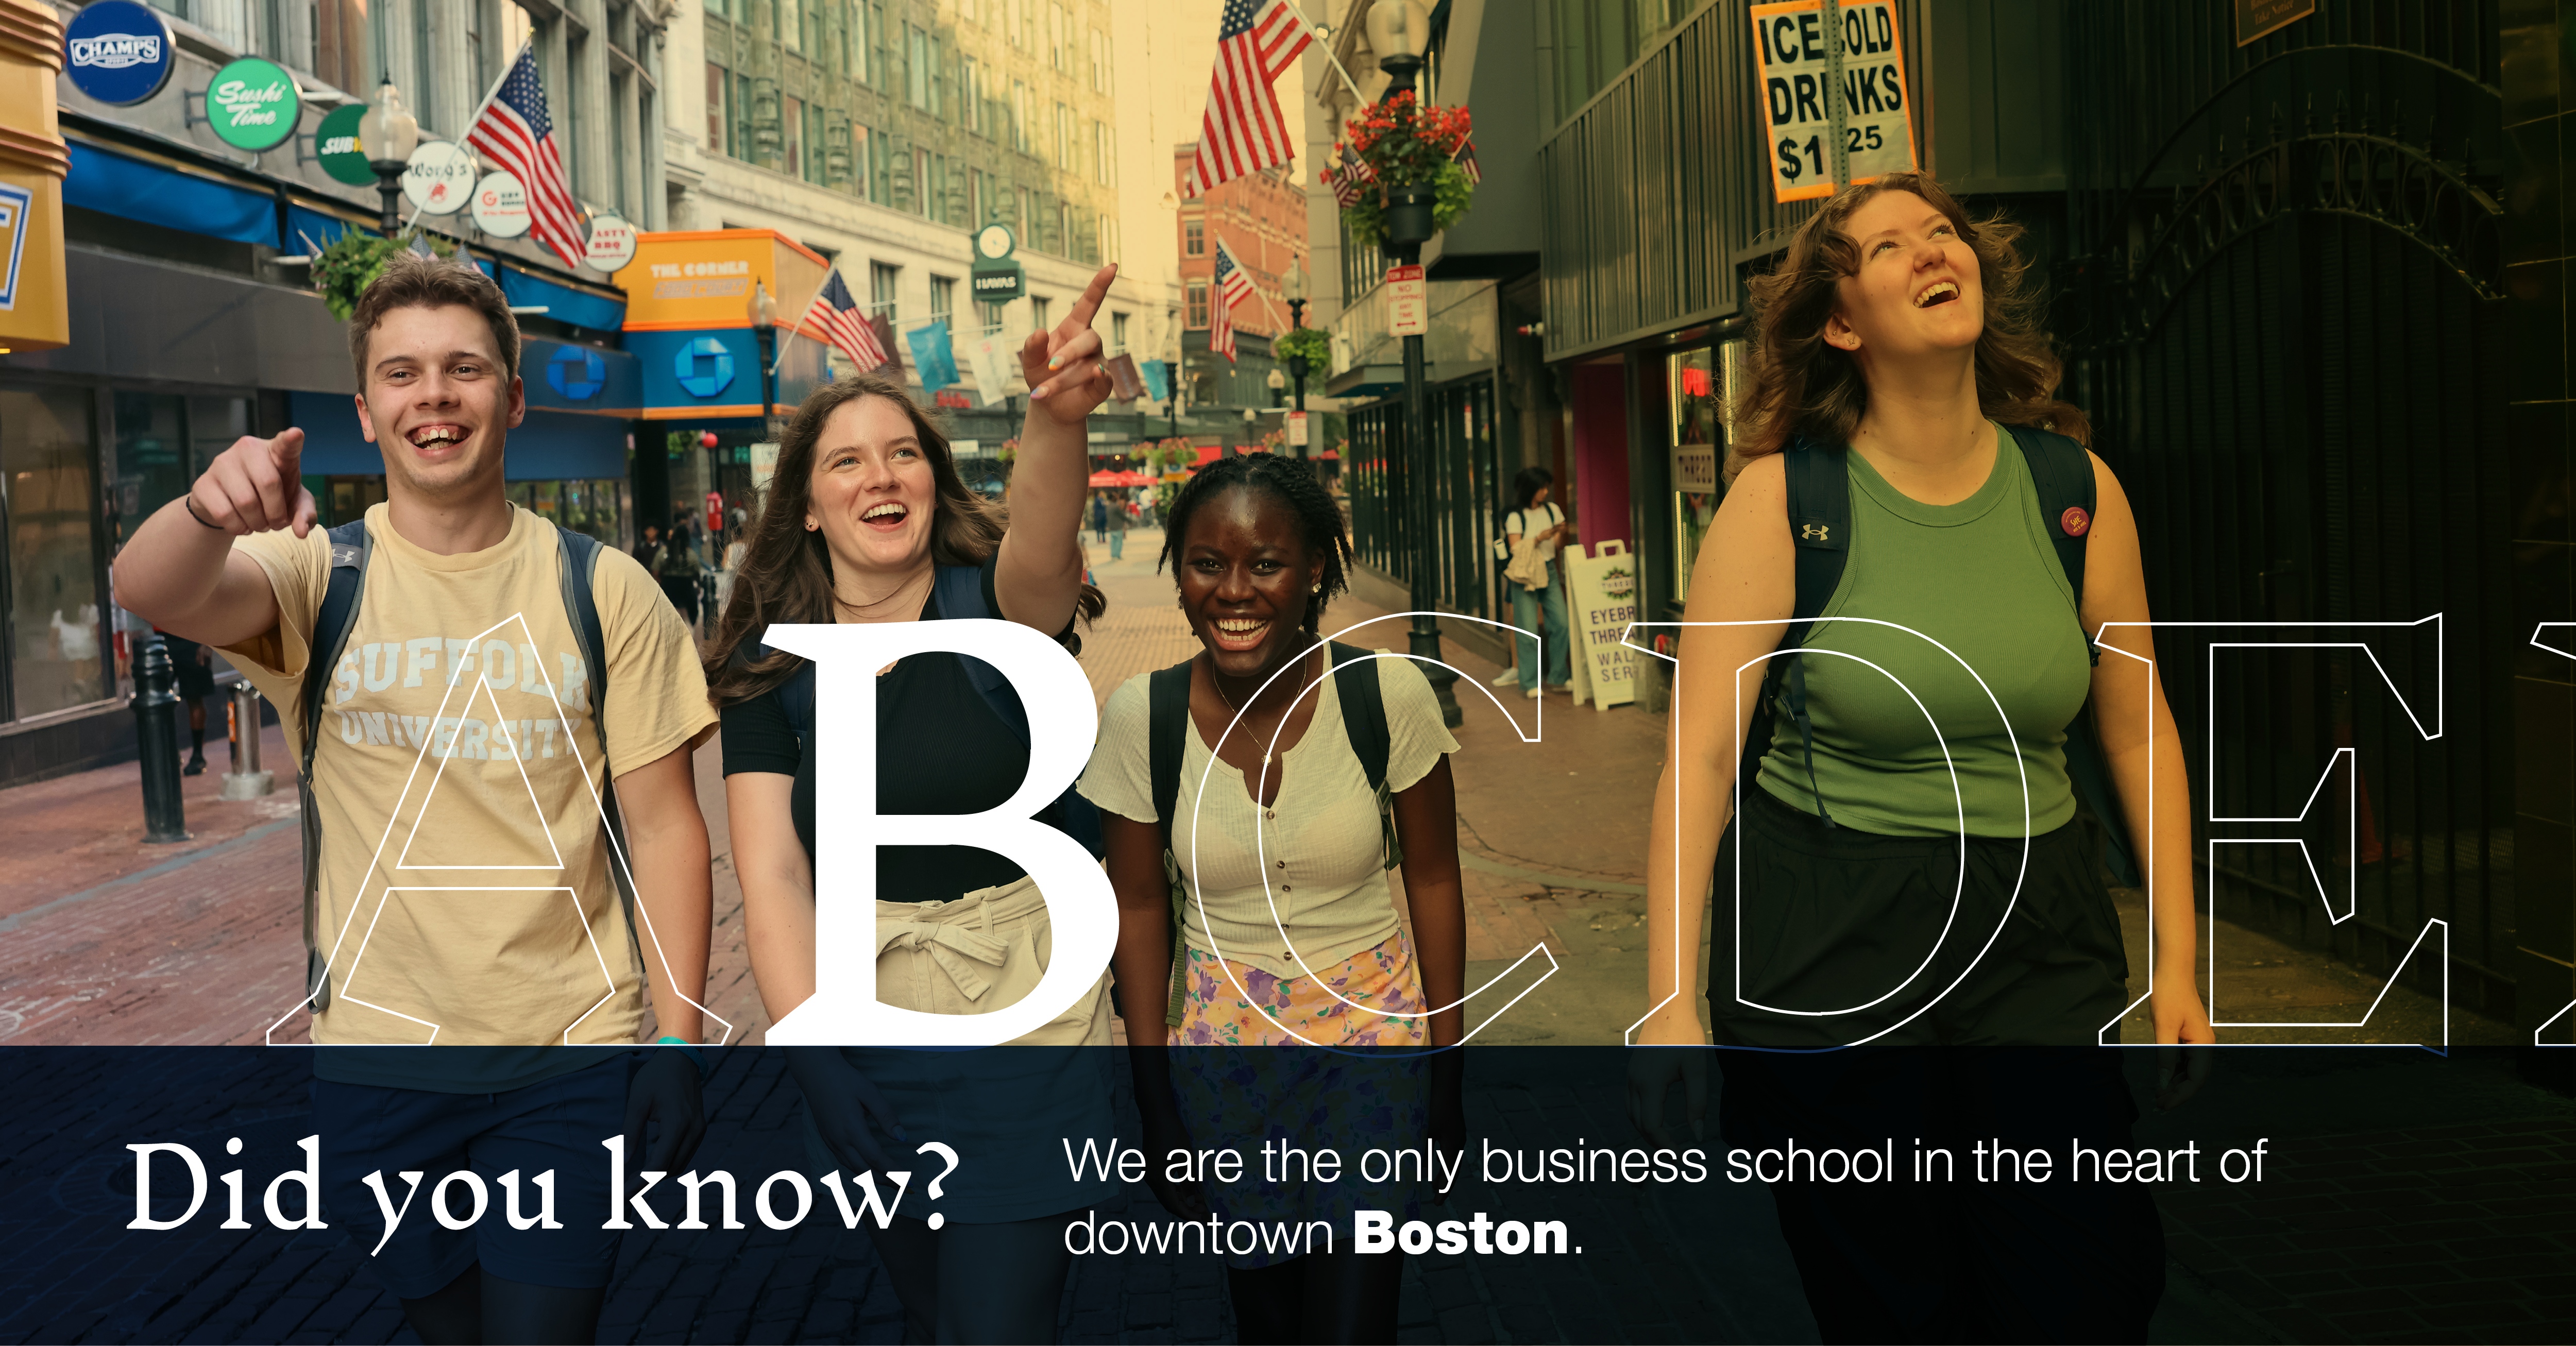 Image of students walking through DTX: "Did you know were are the only business school in the heart of downtown Boston?"